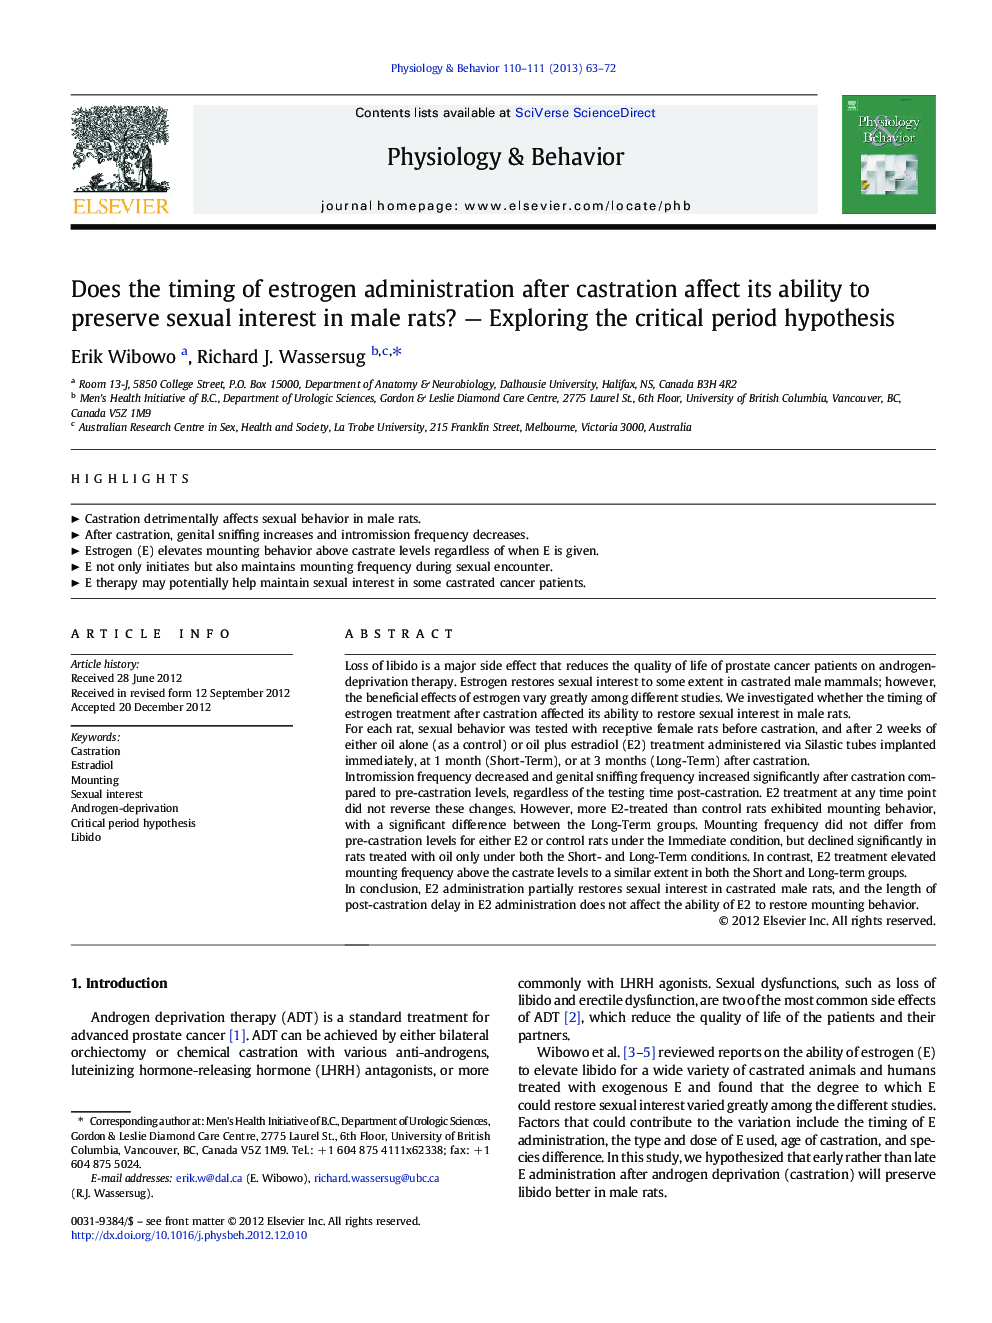 Does the timing of estrogen administration after castration affect its ability to preserve sexual interest in male rats? - Exploring the critical period hypothesis